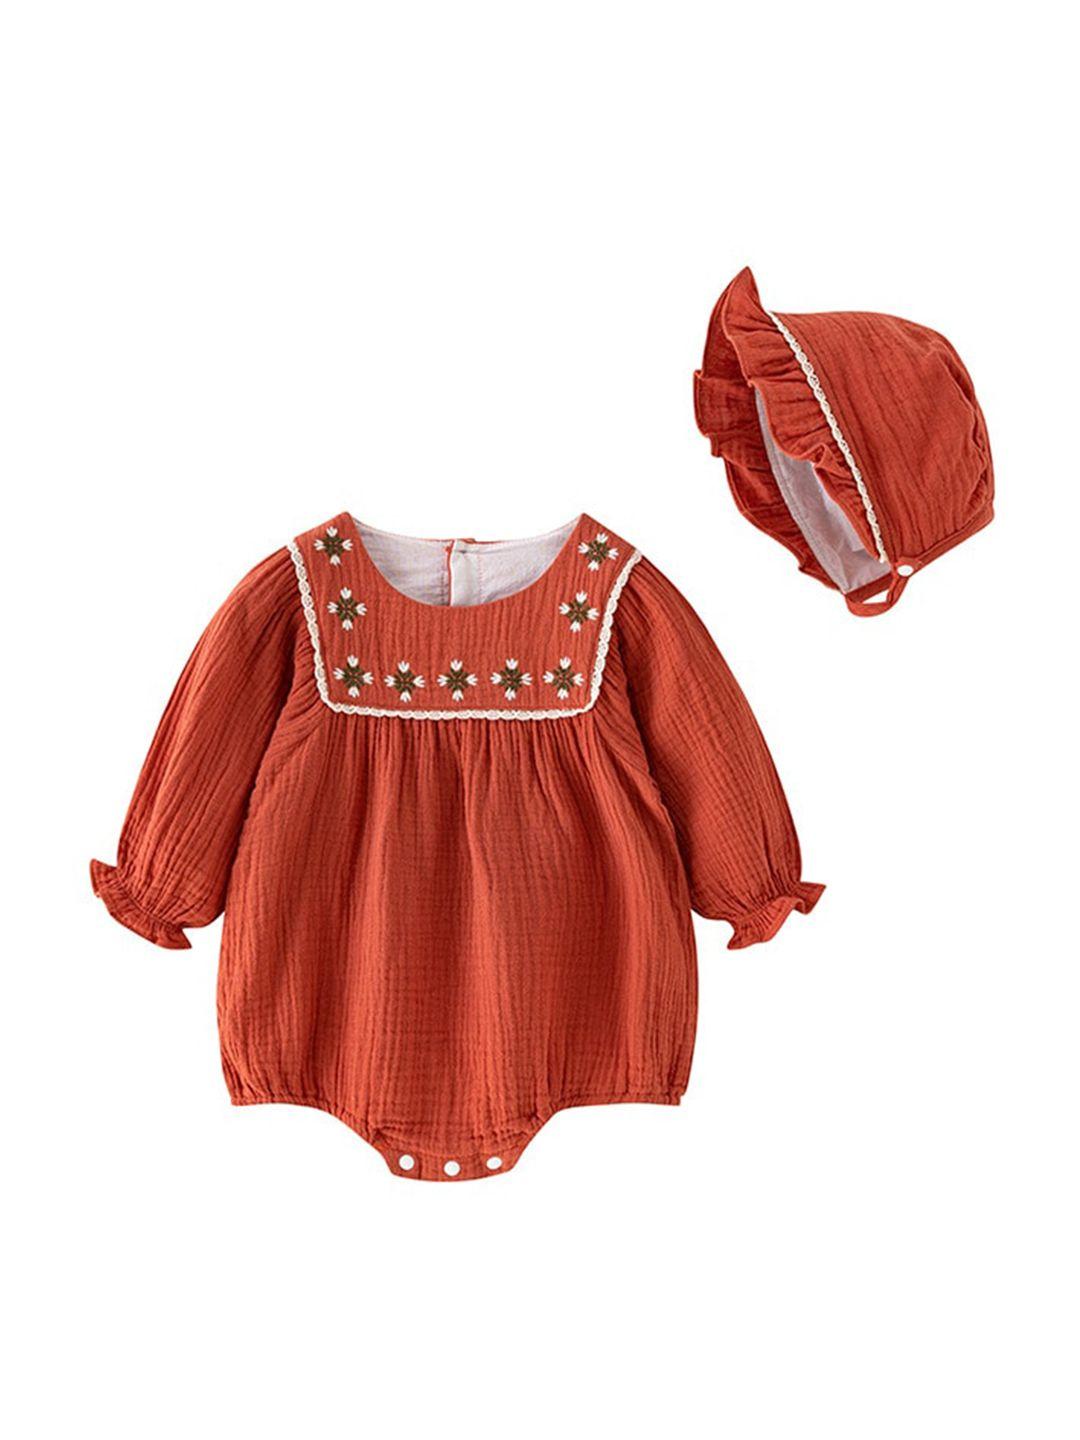 stylecast-red-infant-girls-embroidered-cotton-romper-with-cap